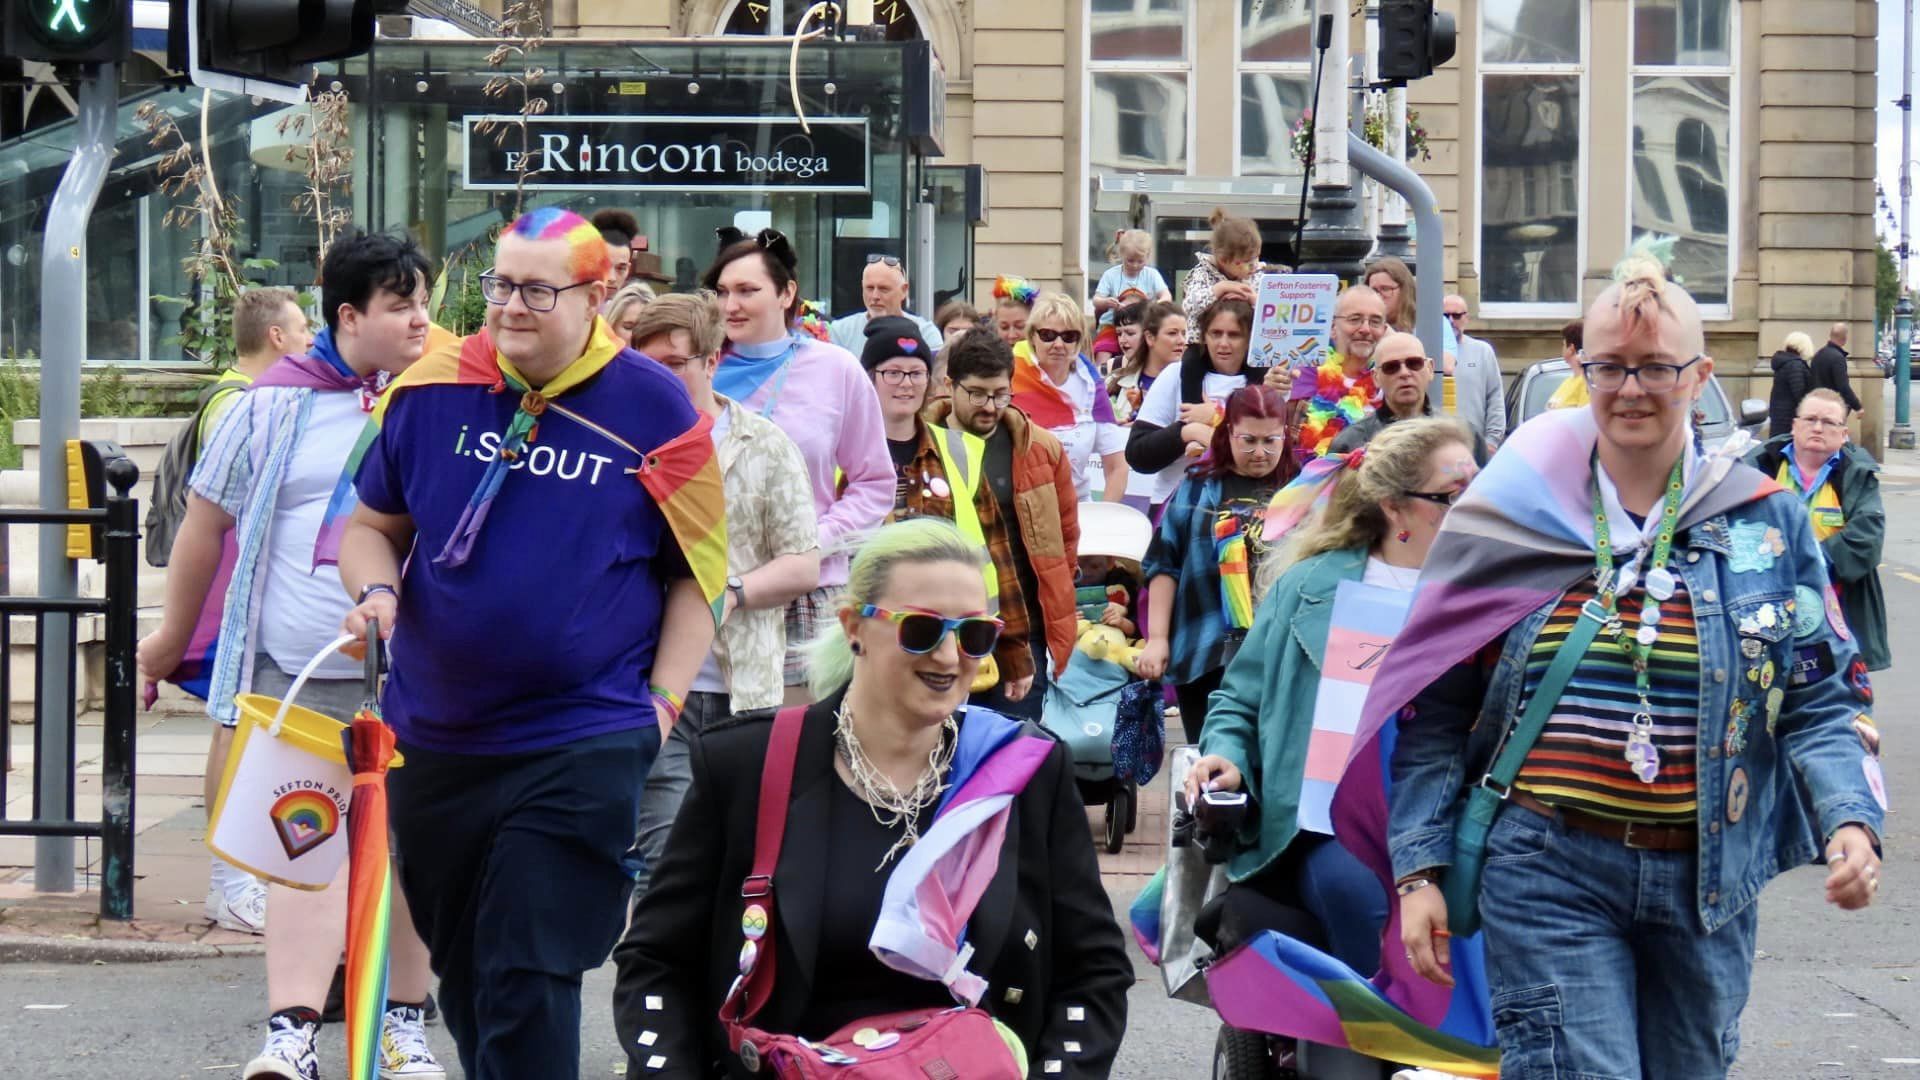 The Sefton Pride parade in Southport. Photo by Andrew Brown Stand Up For Southport